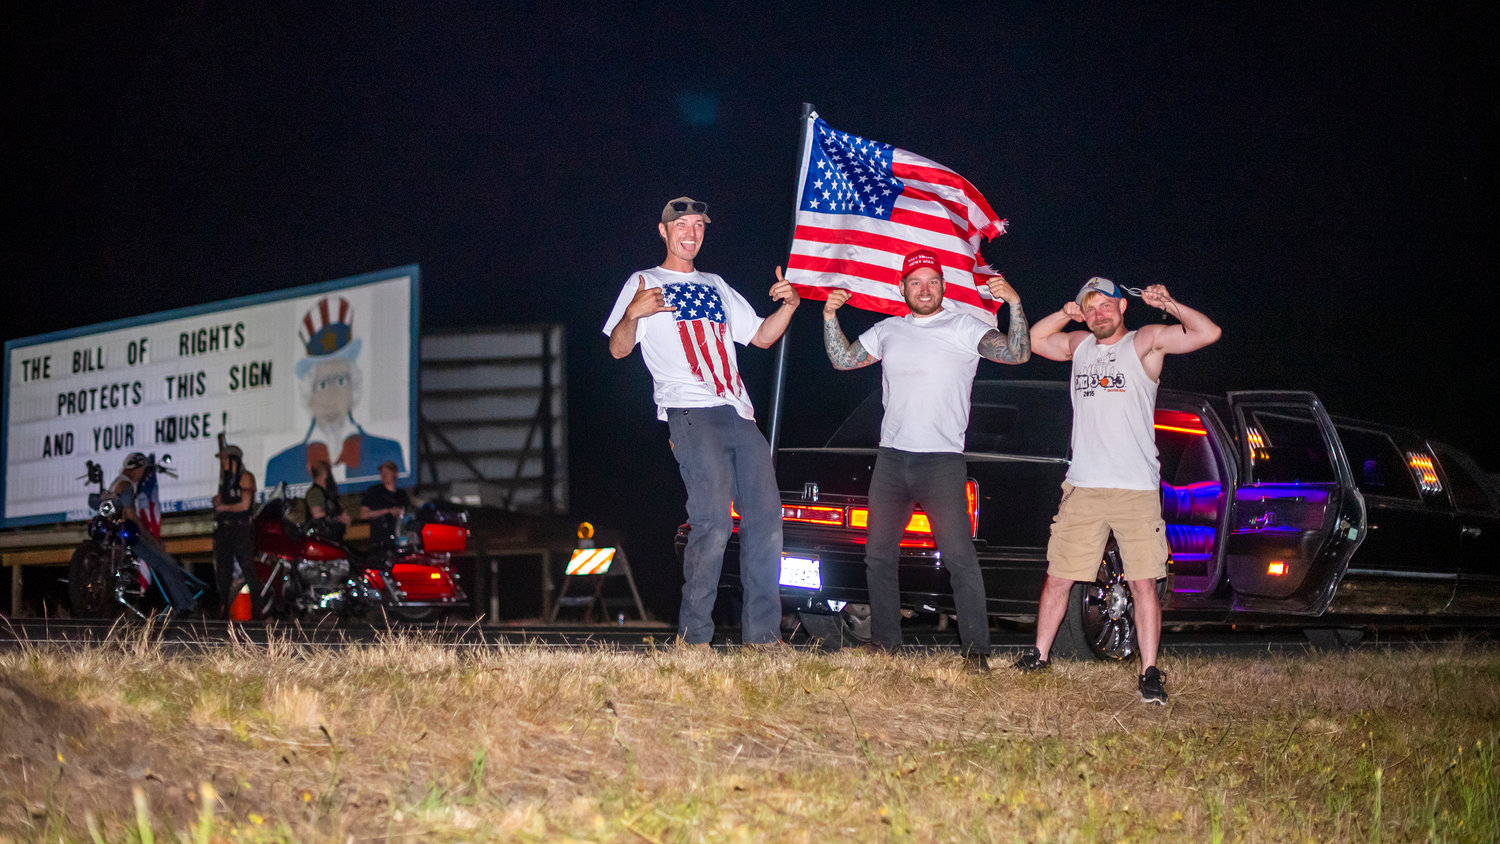 From left to right, Drew Webb, Cameron Bluhm, and Austin Jones stand outside a limousine while an American flag waves behind as they "protect" the Hamilton sign from Antifa threats Tuesday night south of Chehalis.